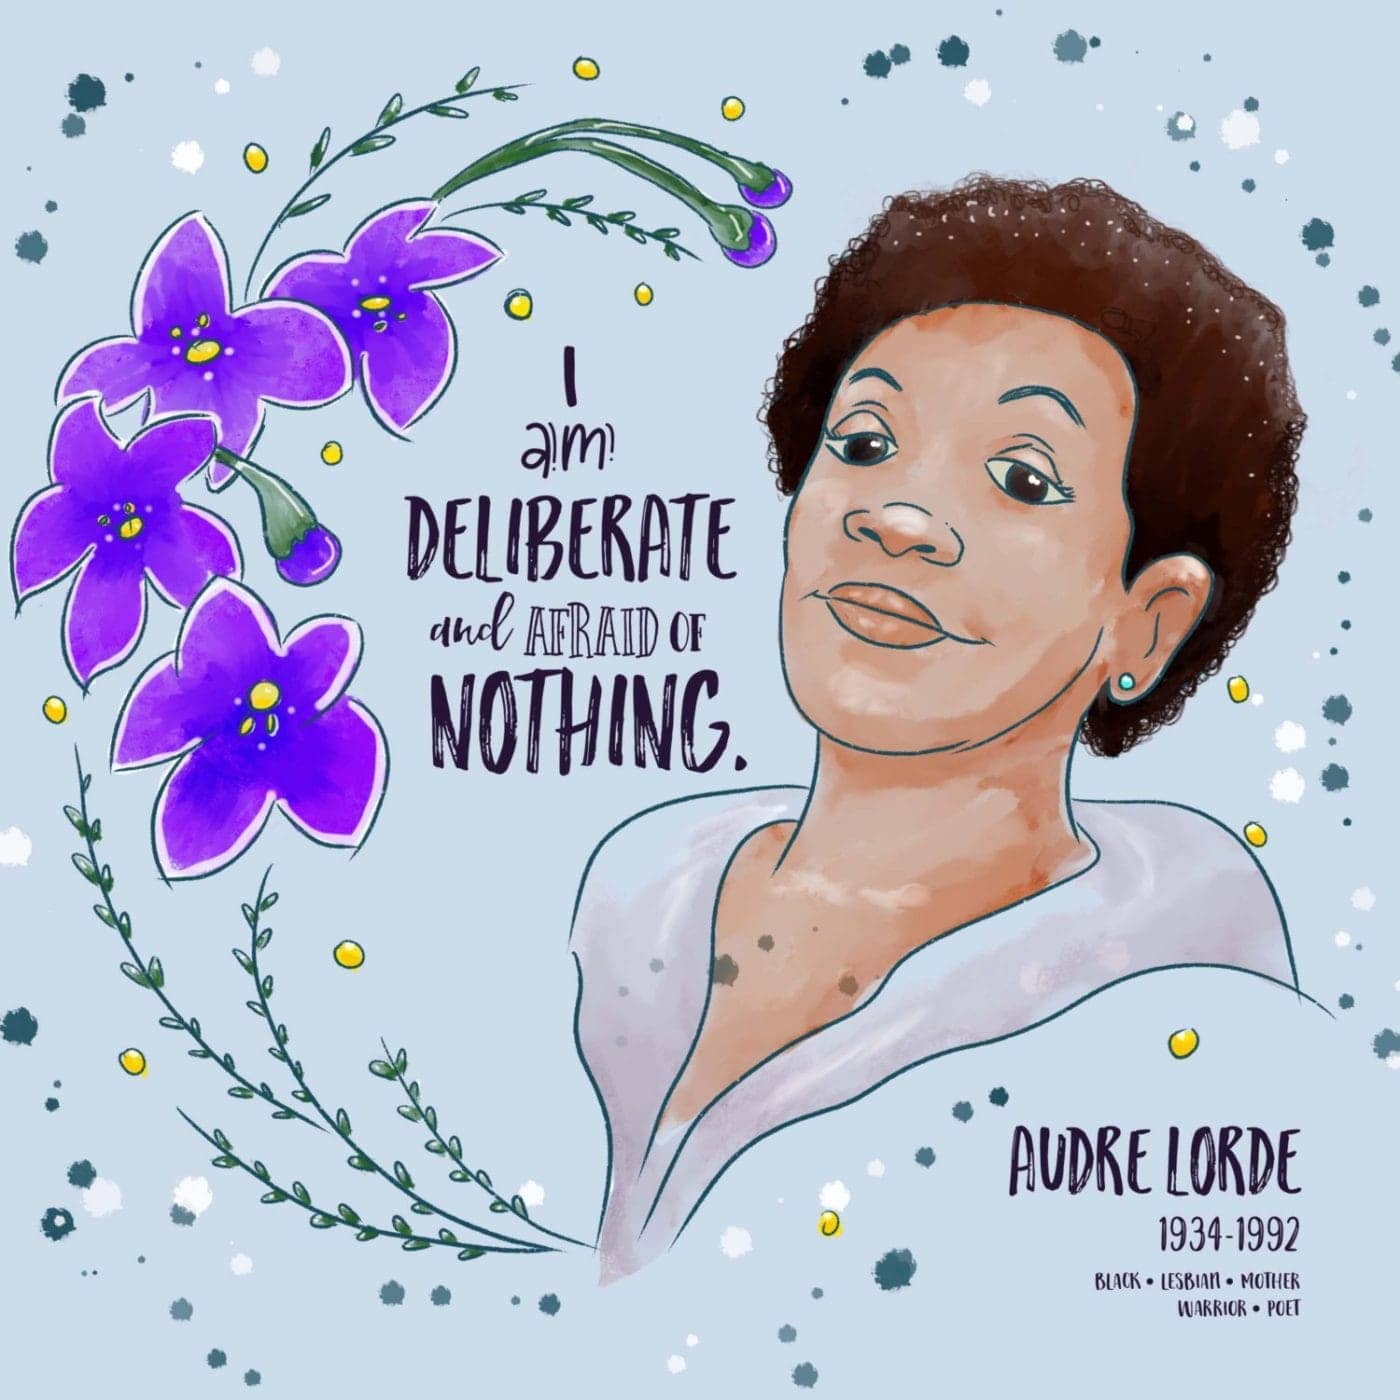 Audre-Lorde-portrait-by-Tiffany-Golden-in-Sol-Affirmations-1400x1400, Children’s book author Tiffany Golden used the pandemic to learn the art of illustrating￼, Culture Currents News & Views 